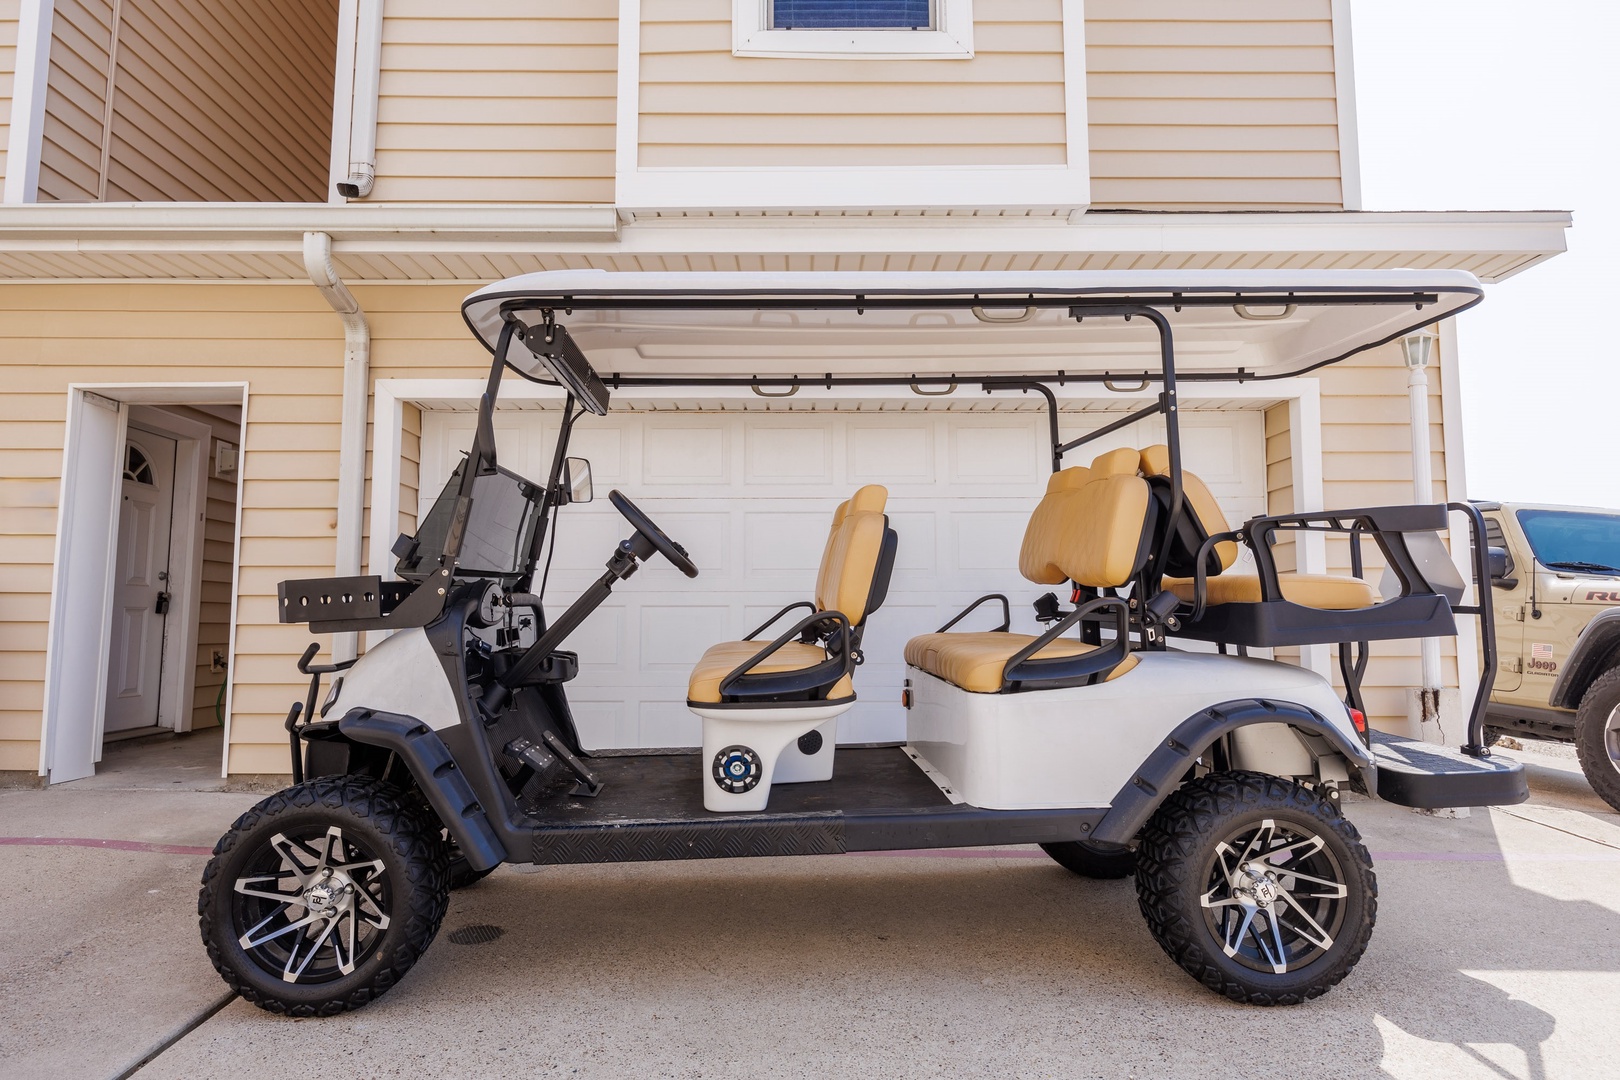 Cruise around the area with ease on the optional golf cart